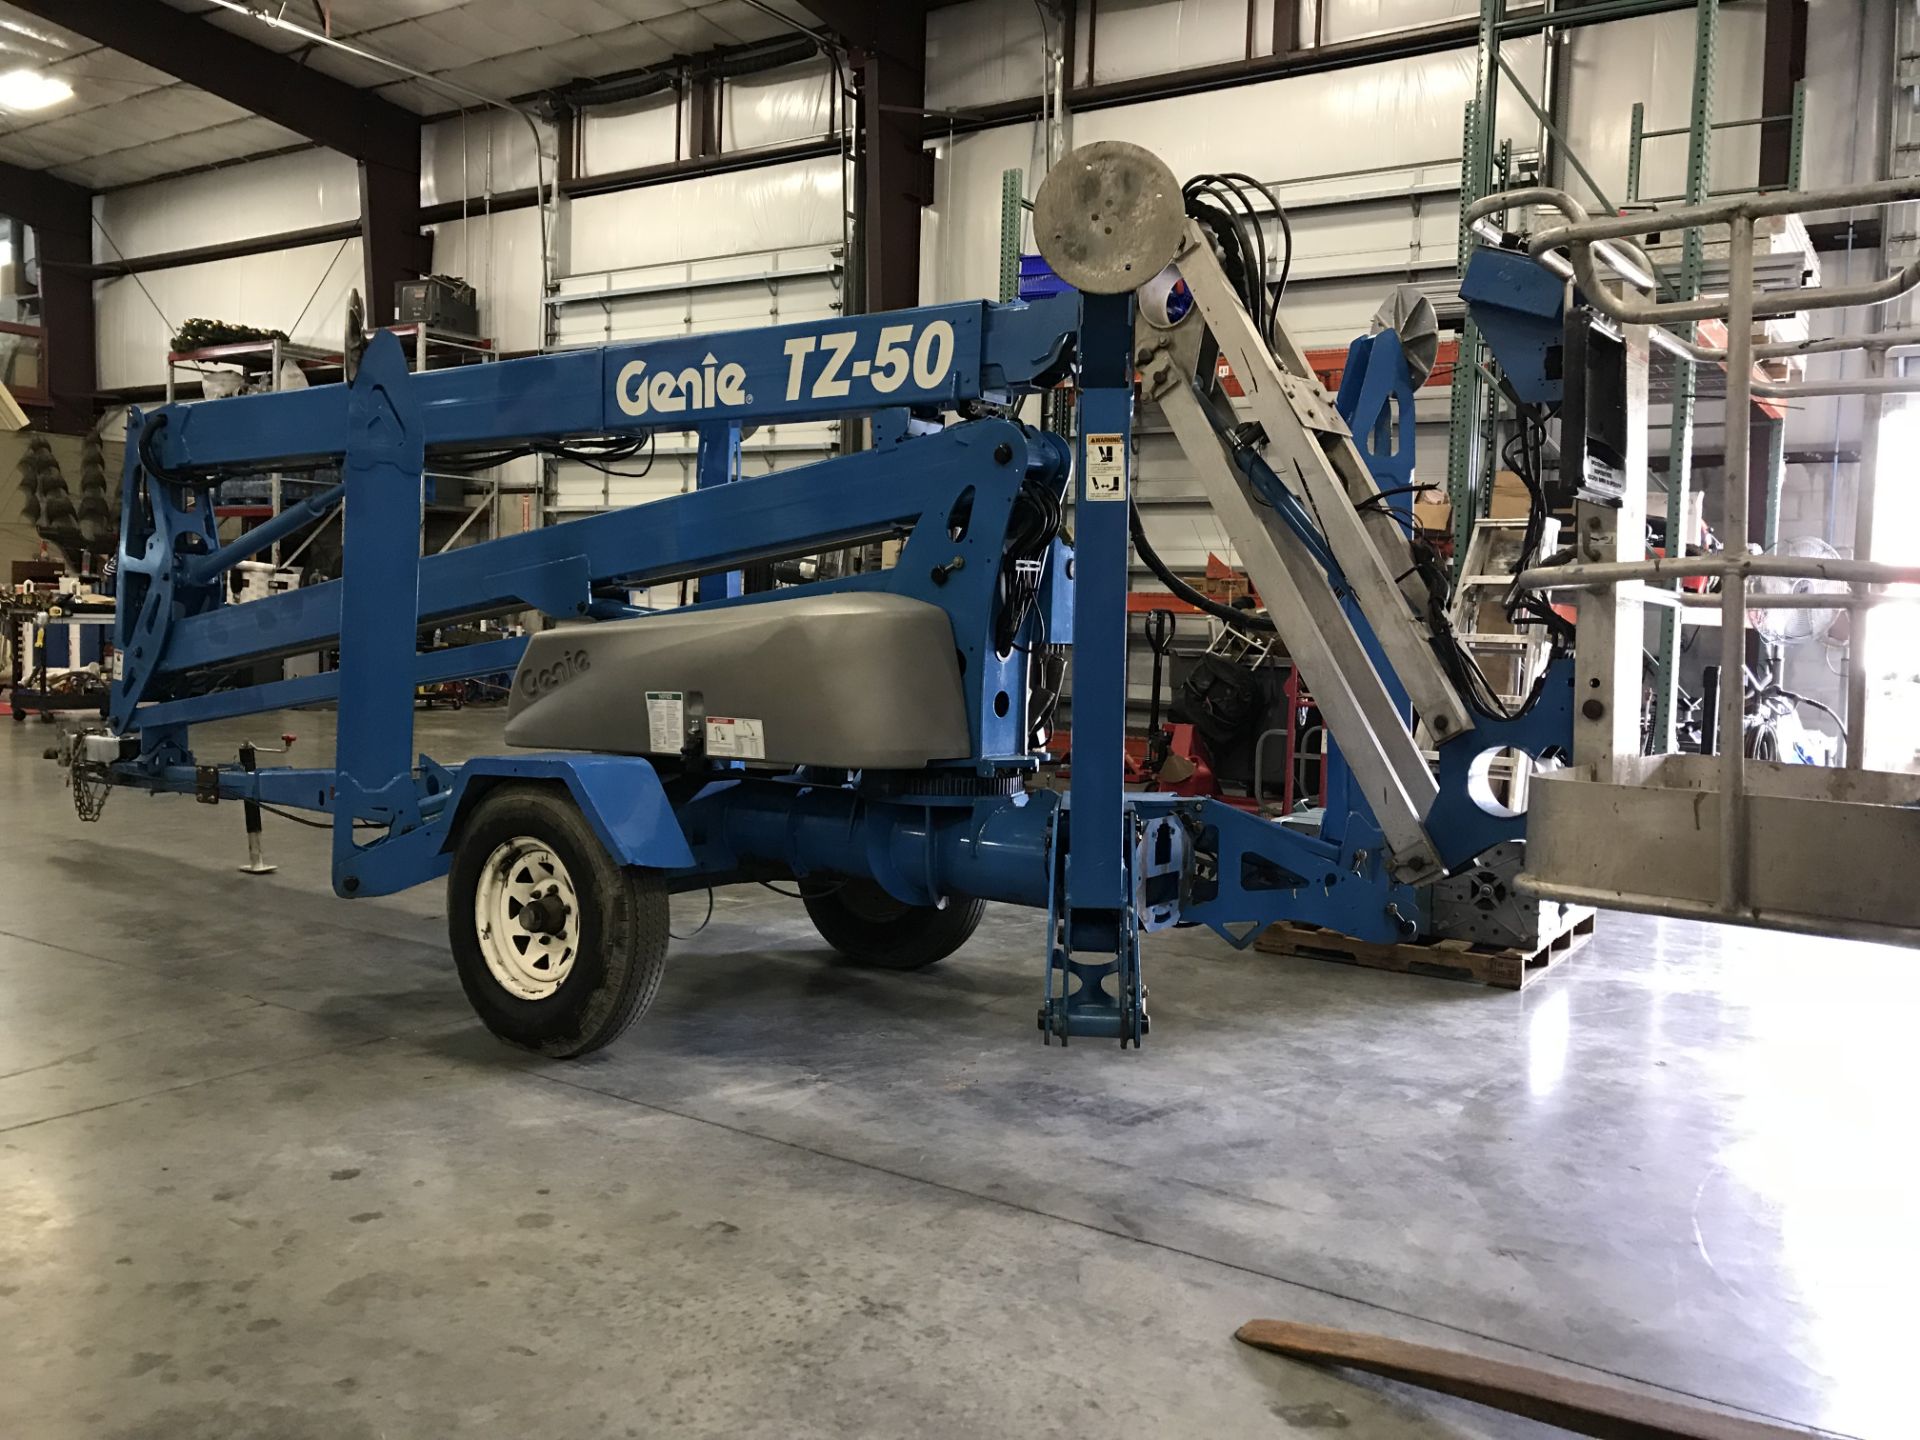 2006 GENIE TZ50 TRAILER MOUNTED BOOM LIFT, ELECTRIC POWERED, 50' PLATFORM HEIGHT, 500LB LIFT CAP., - Image 6 of 9